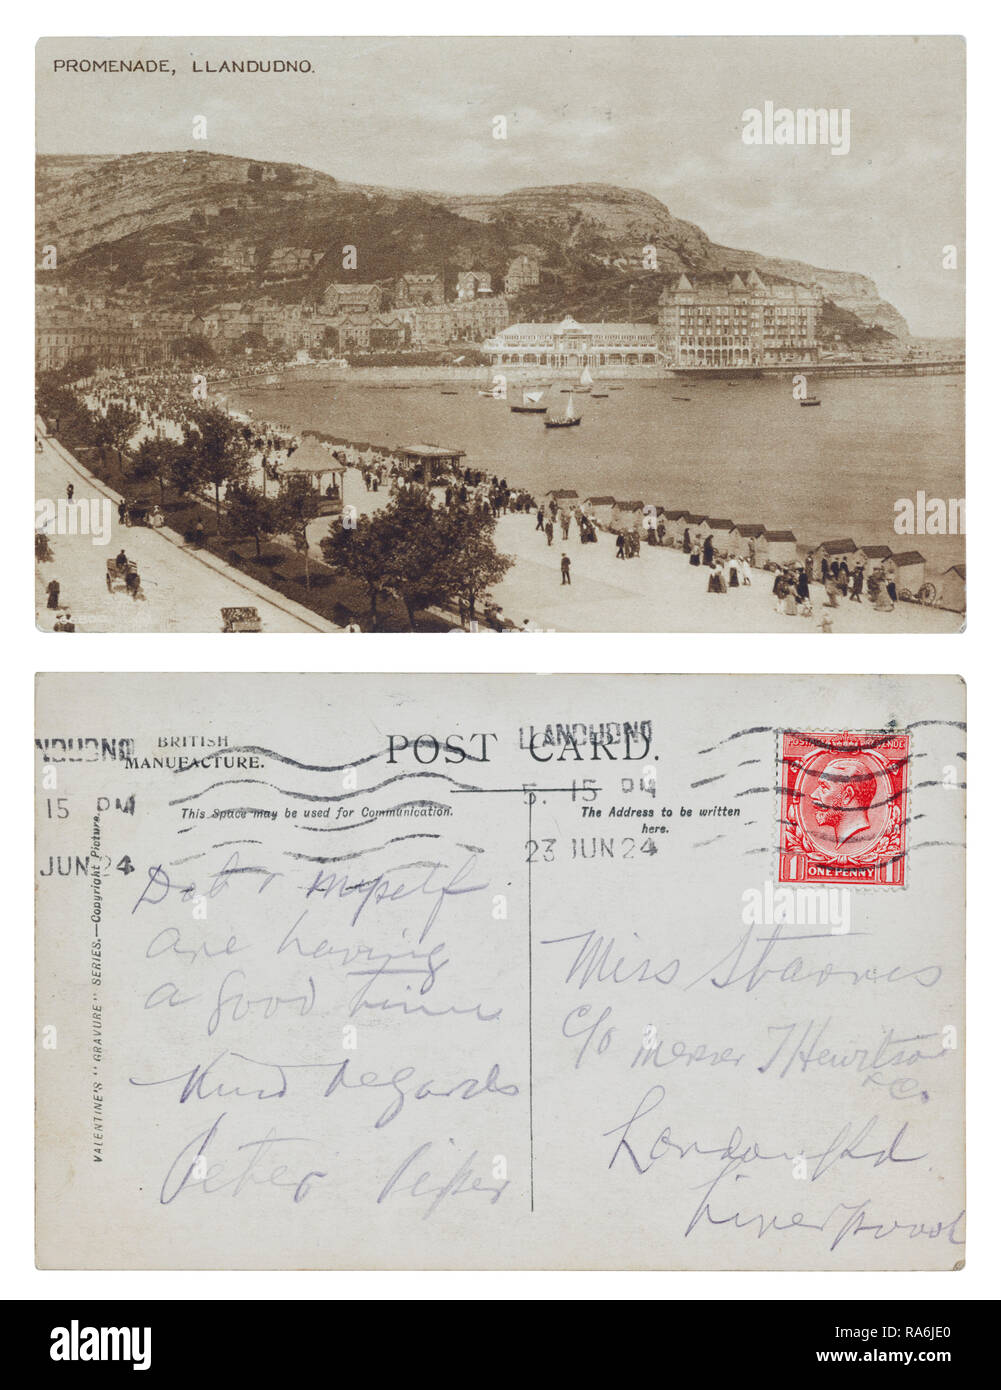 Postcard sent from Llandudno to Miss Starris, Messers J Hewitson & Co, London Road, Liverpool Stock Photo